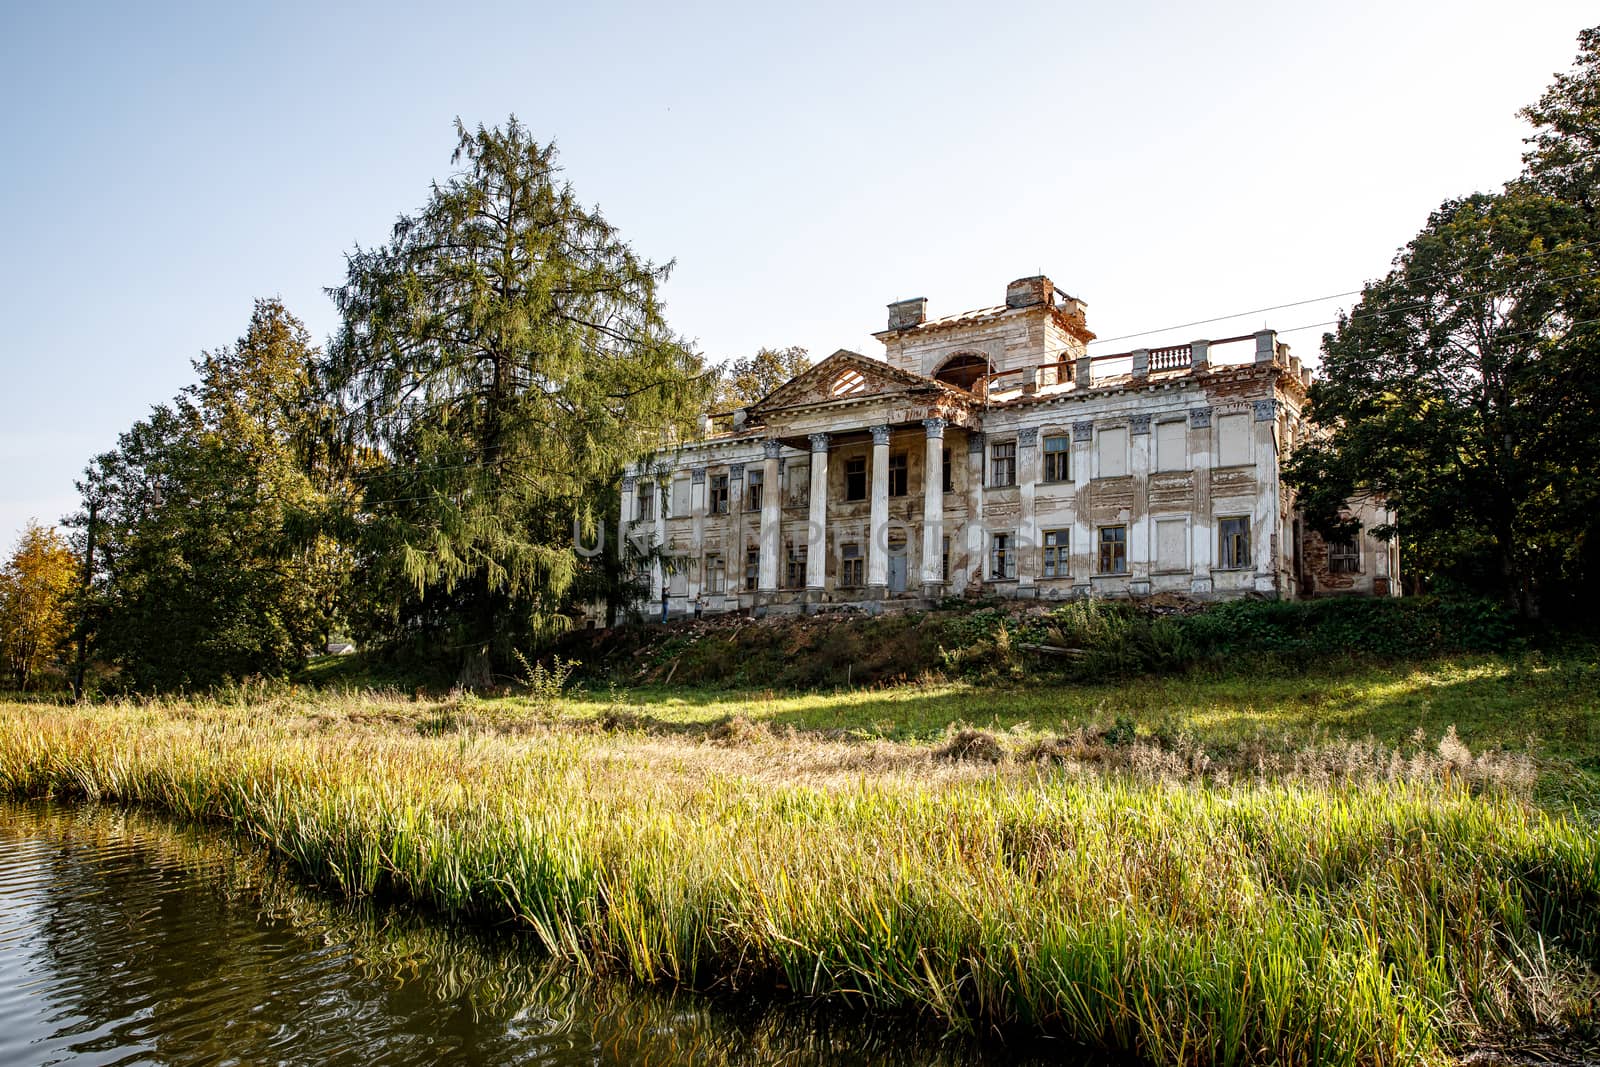 Old abandoned building with columns in nature